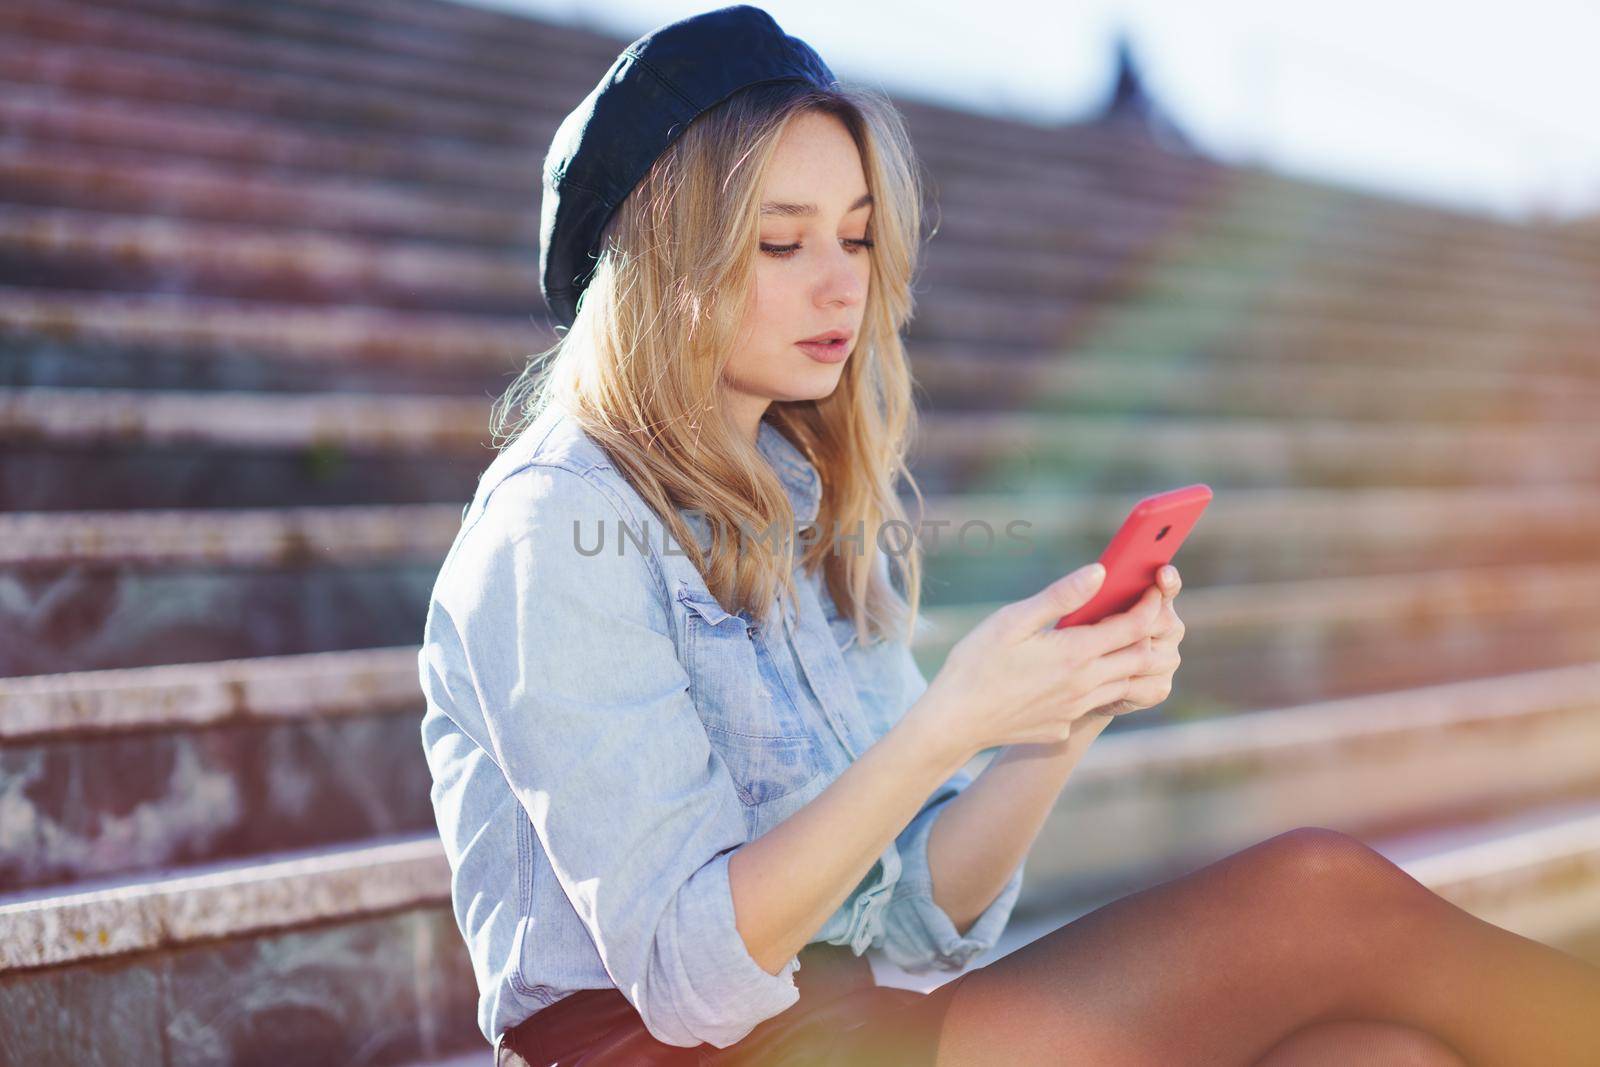 Blonde woman using a smartphone sitting on some city steps, wearing a denim shirt and black beret. by javiindy